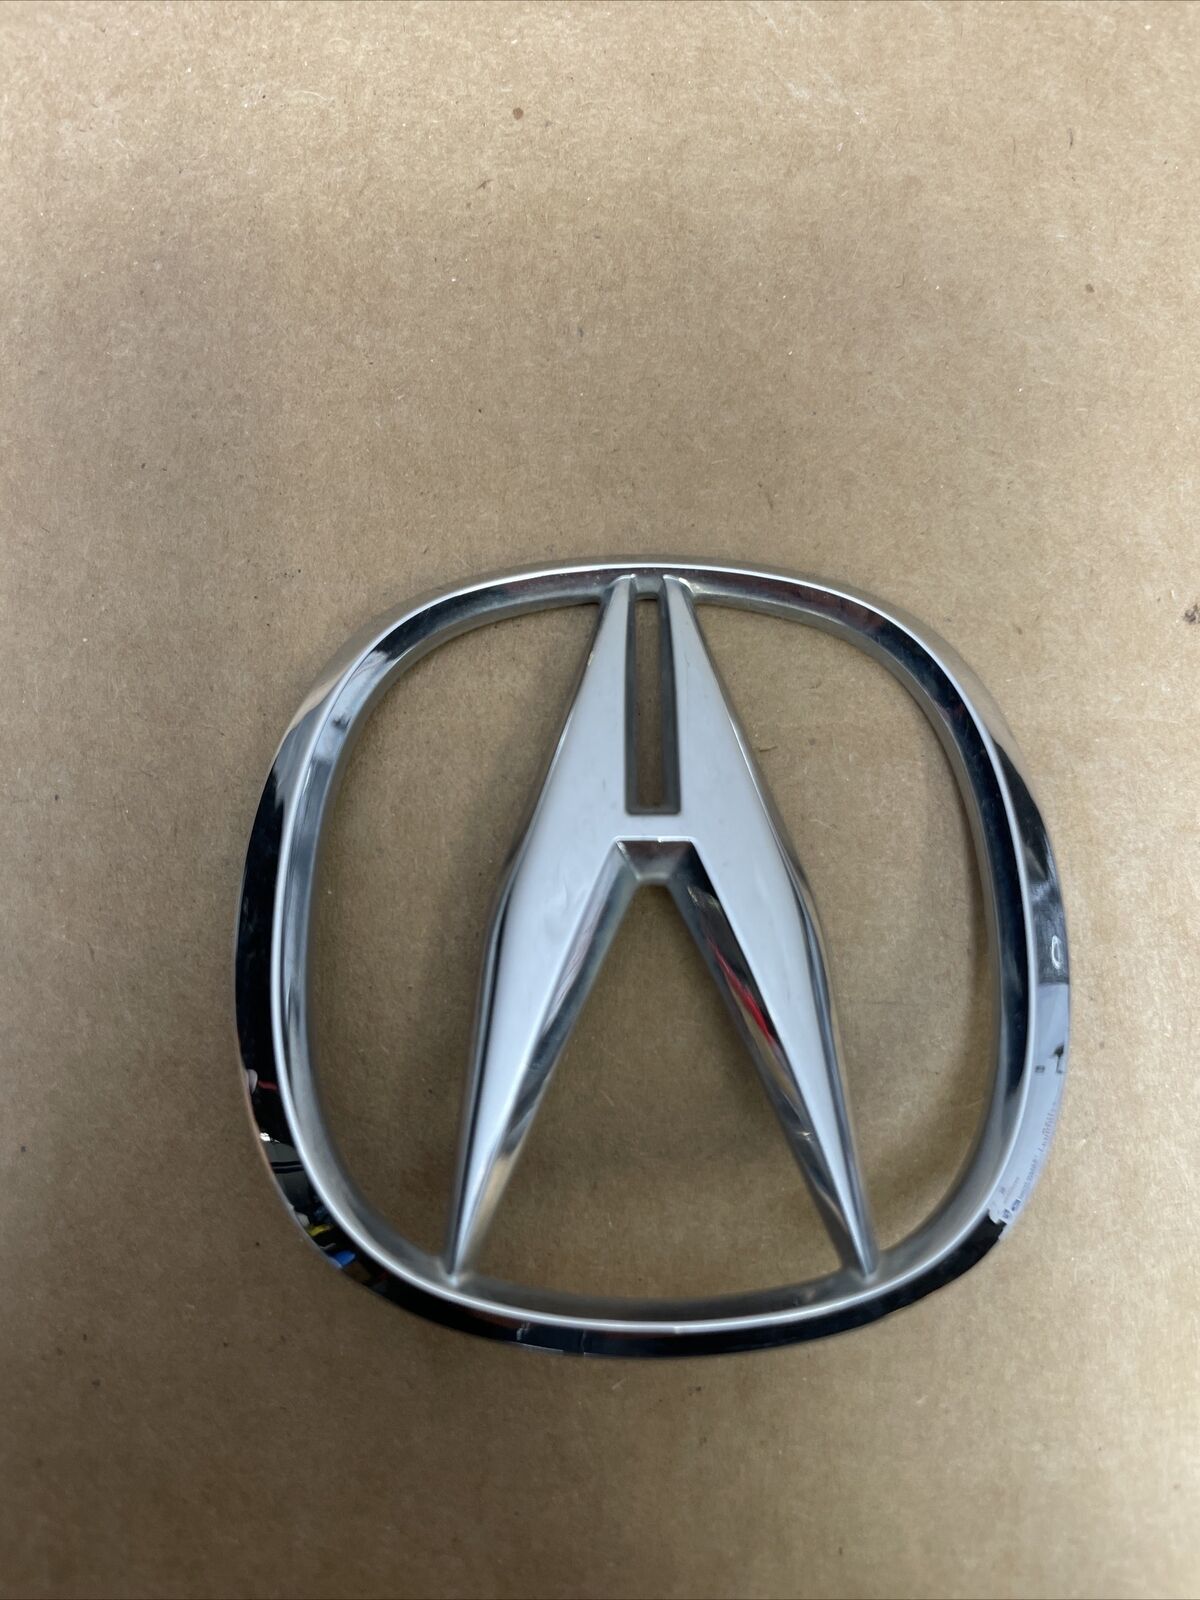 FREE SHIPPING OEM Acura 2.2CL 3.0CL 2.3CL CL 1997 1998 1999 Rear Emblem Badge